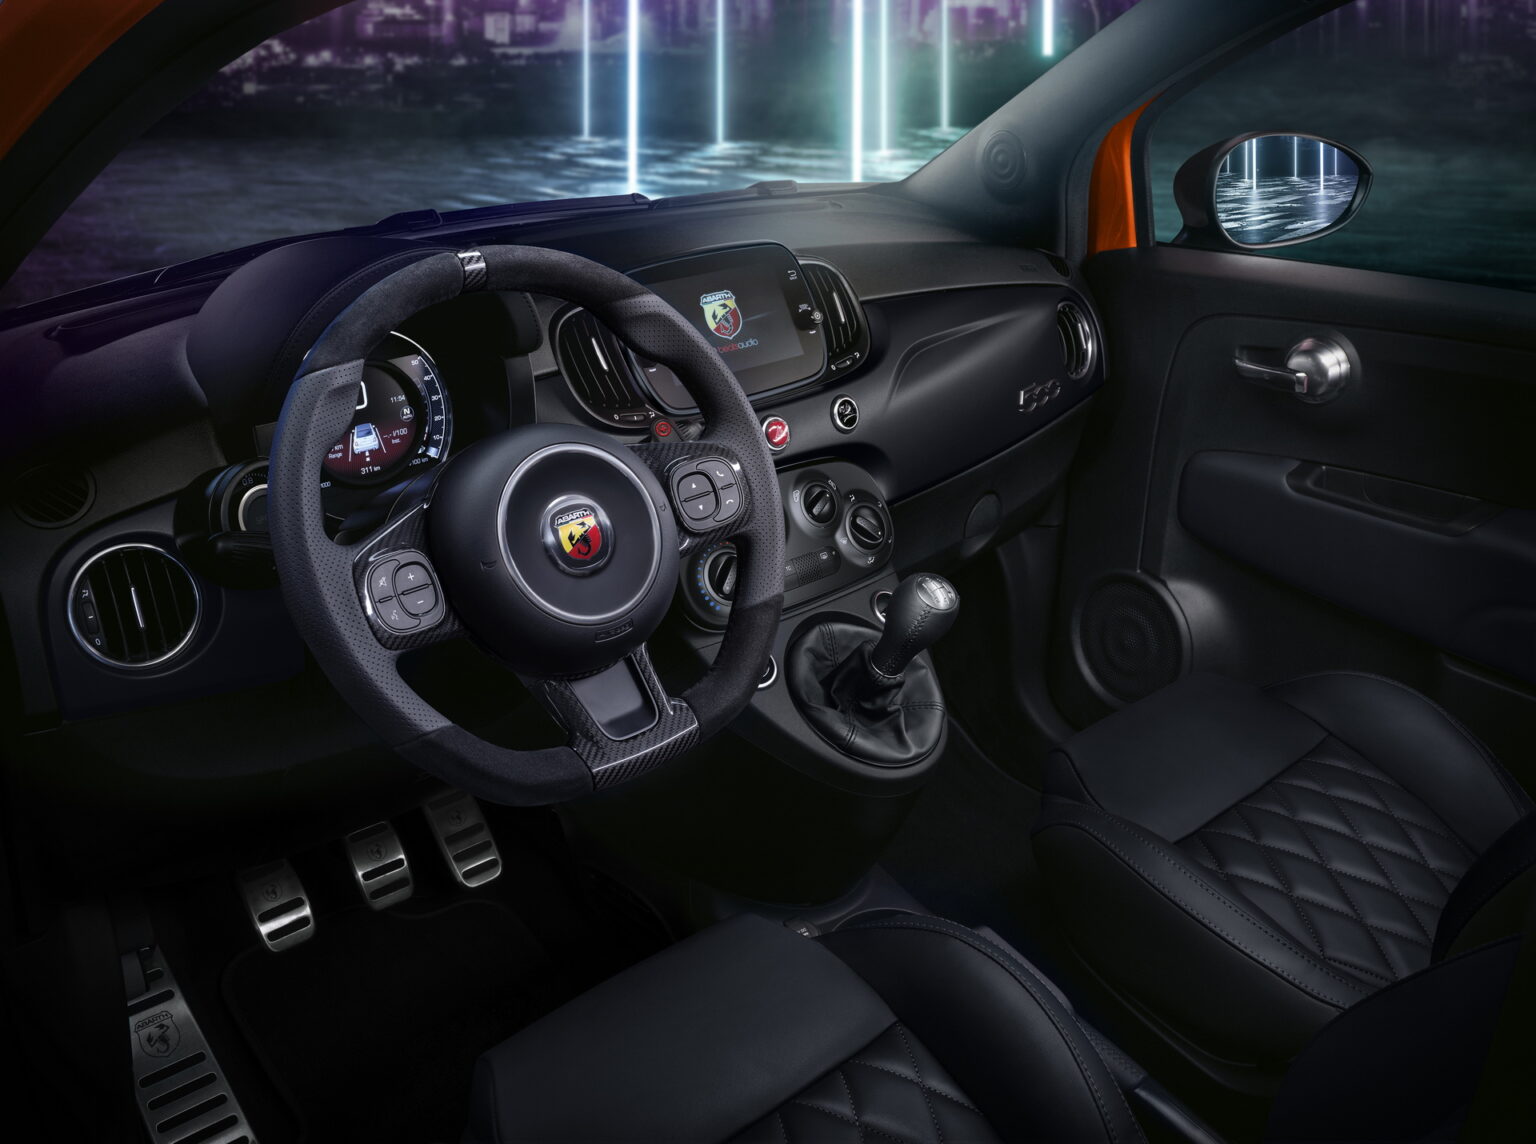 Abarth 595 695 Range Gets Life Extension To 2023 Along With A New